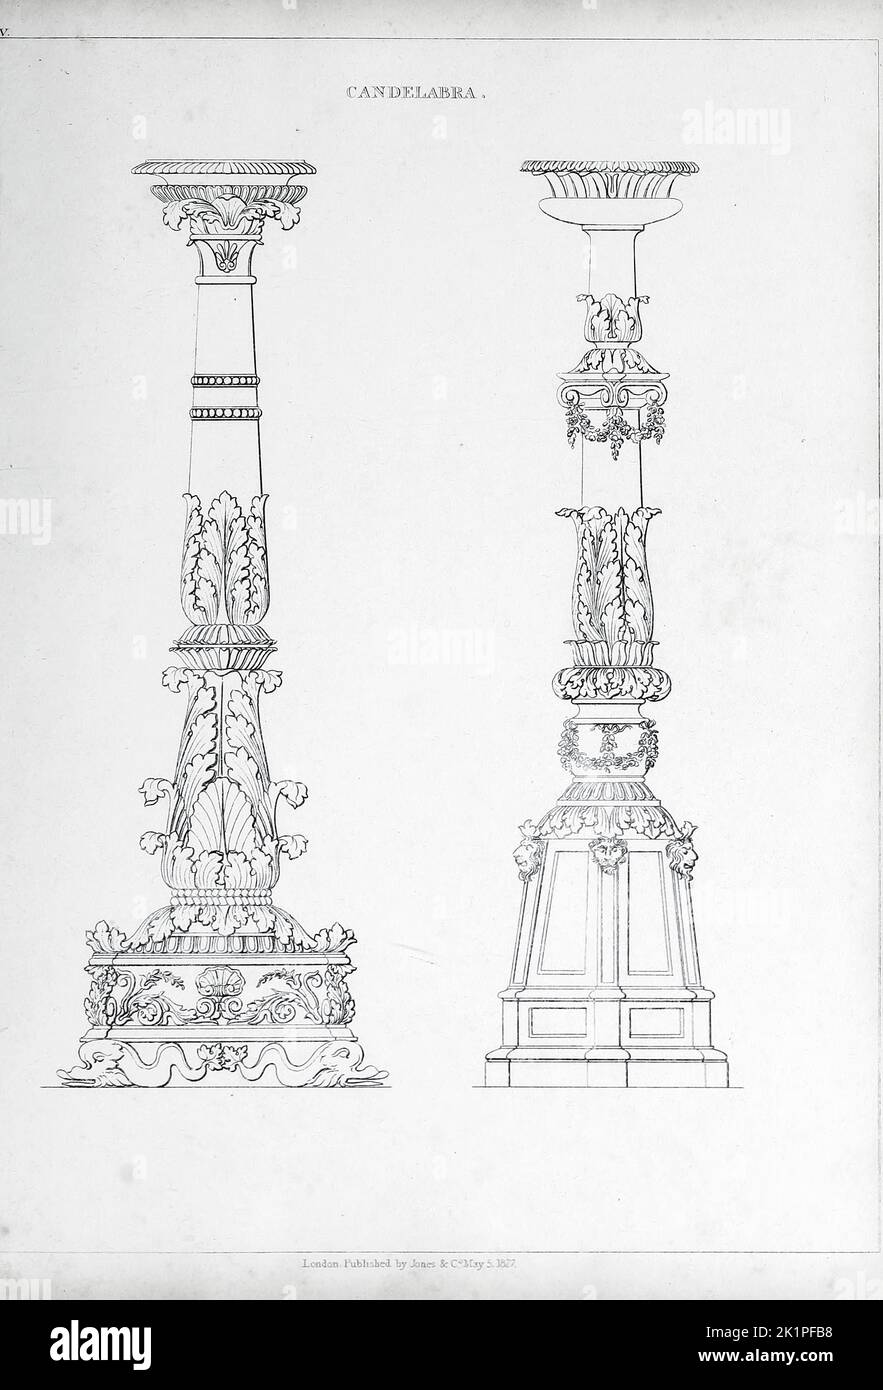 candelabra, from the The cabinet-maker and upholsterer's guide : being a complete drawing book, in which will be comprised treatises on geometry and perspective as applicable to the above branches of mechanics illustrated by numerous engravings of new and original designs for household furniture, and interior decoration beautifully and correctly coloured By Smith, George, 1808-1899 Publication date 1826 Publisher London : Jones and Co. Stock Photo